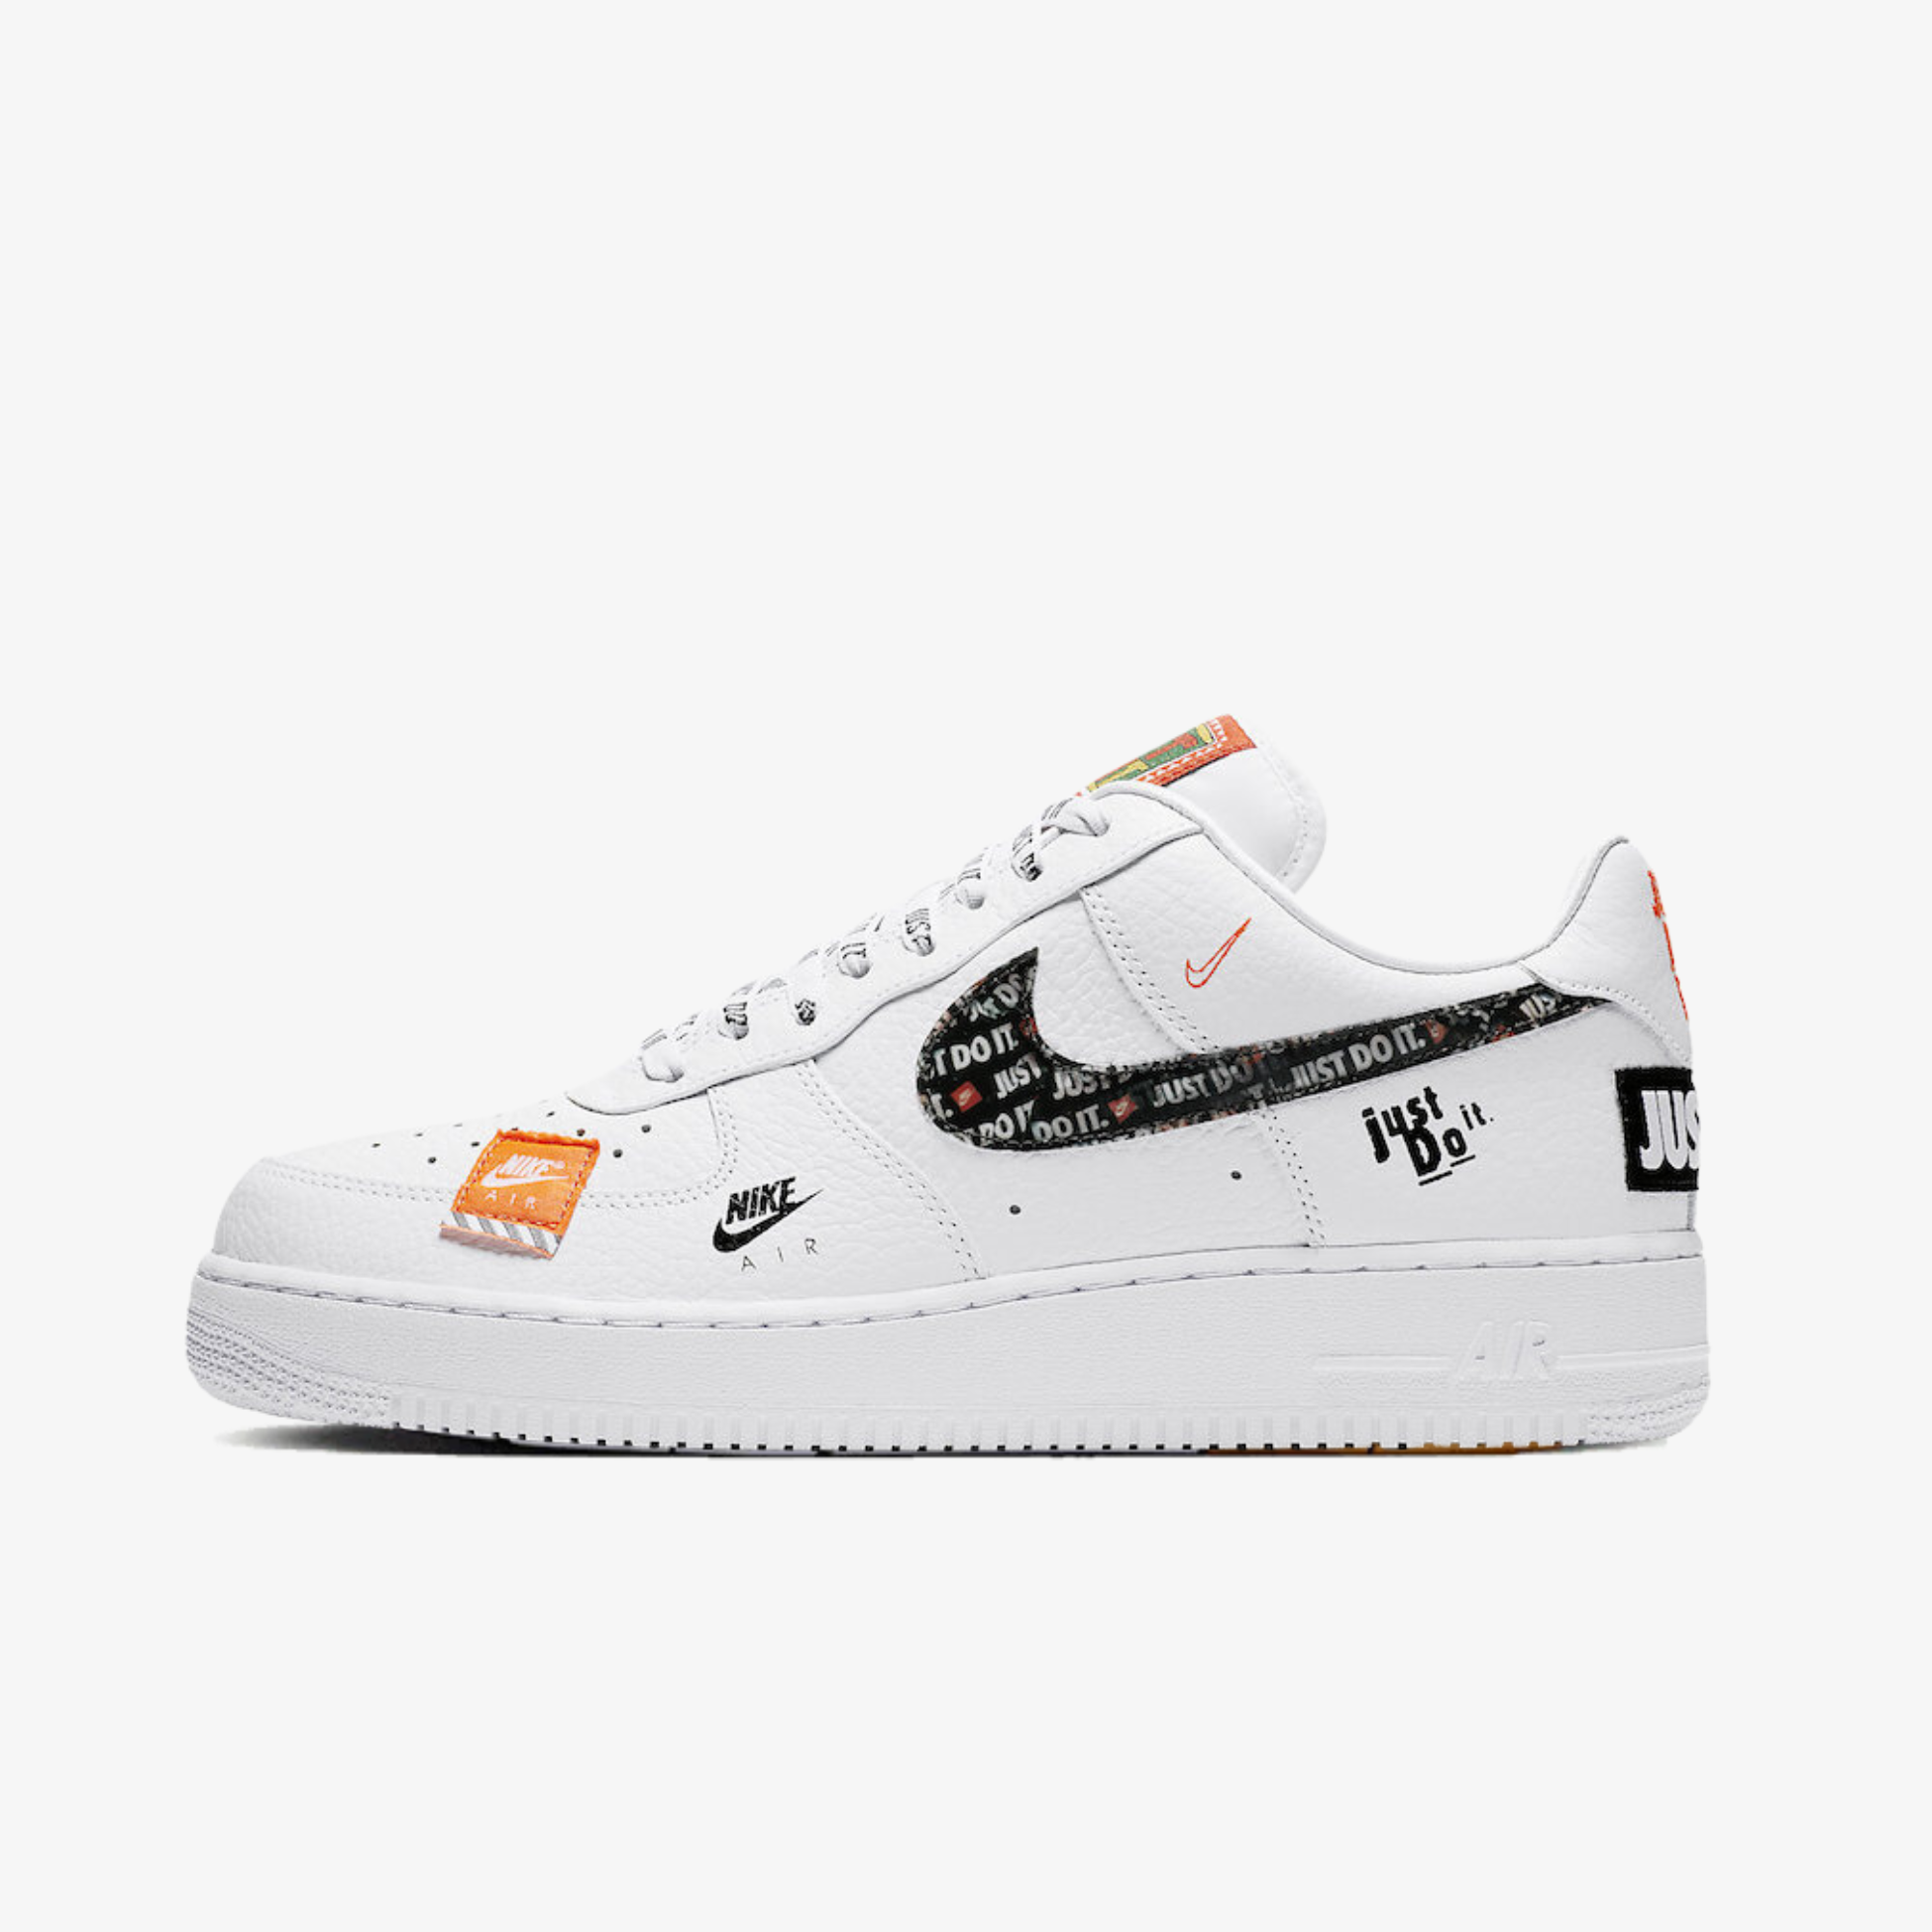 Nike Air Force 1 '07 PRM "Just Do It" Blanco